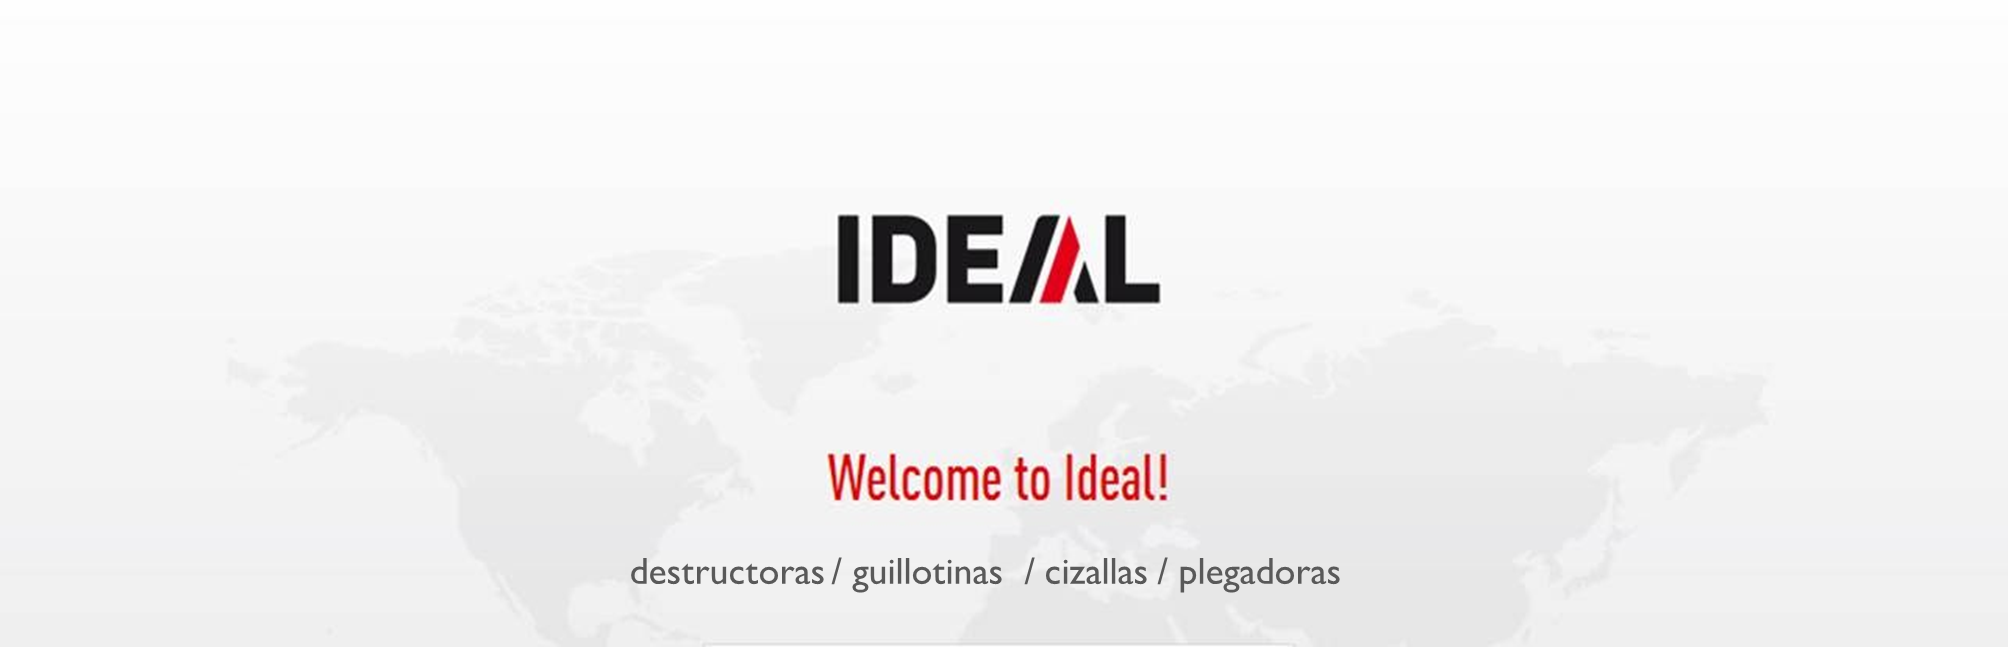 welcome ideal